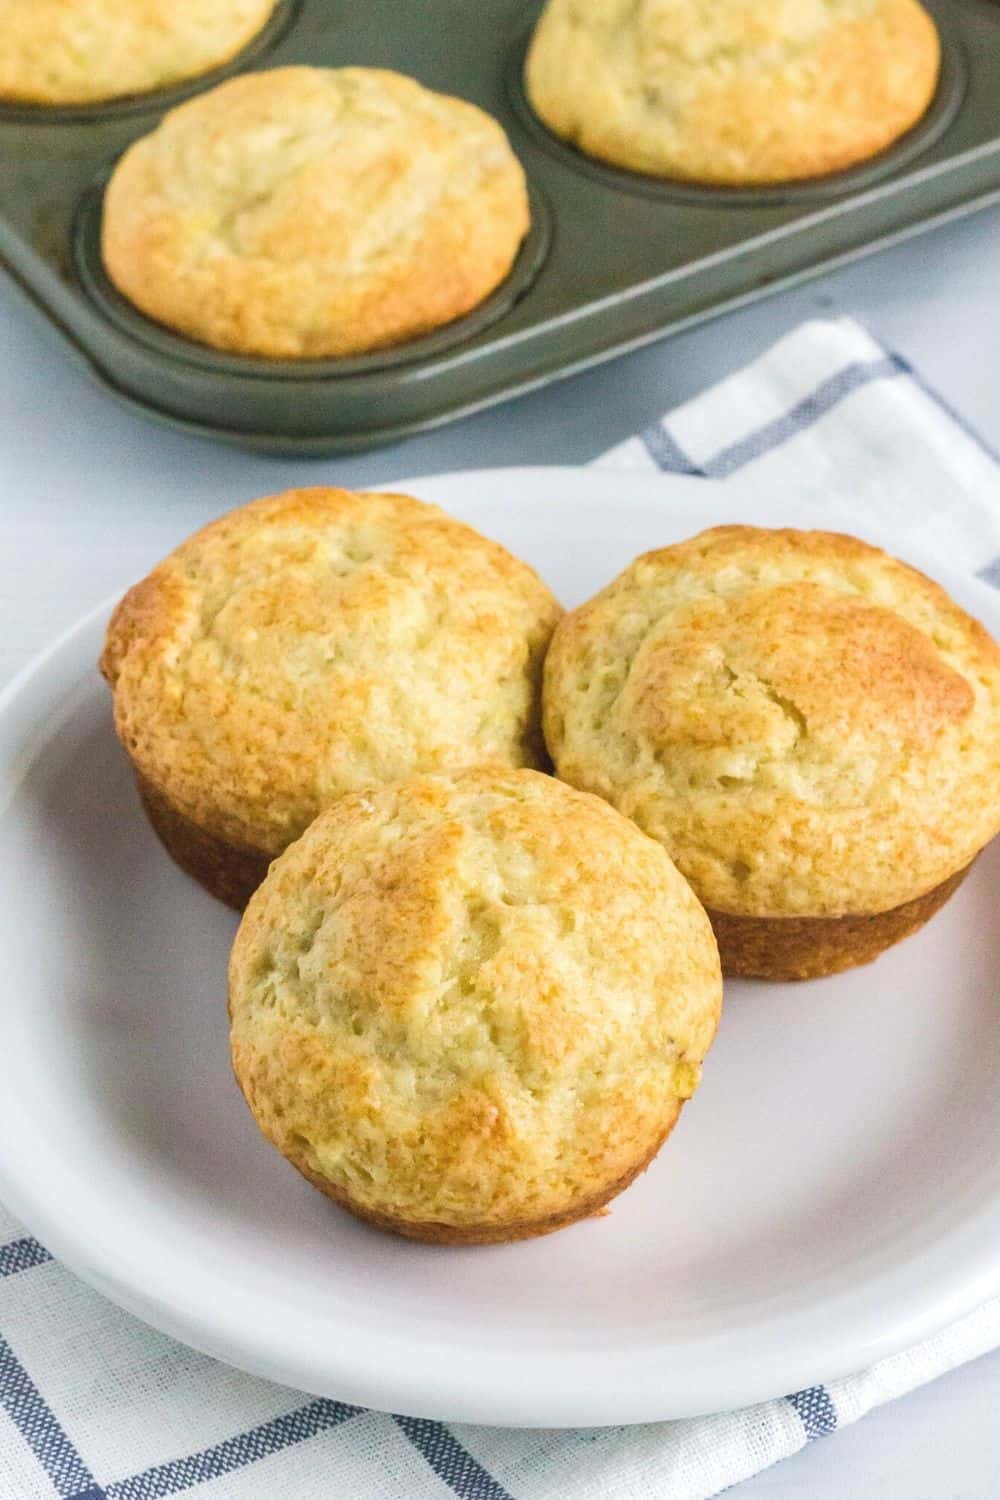 white plate with three banana muffins made with bisquick served on it. The muffin tin with remaining muffins is in the background.